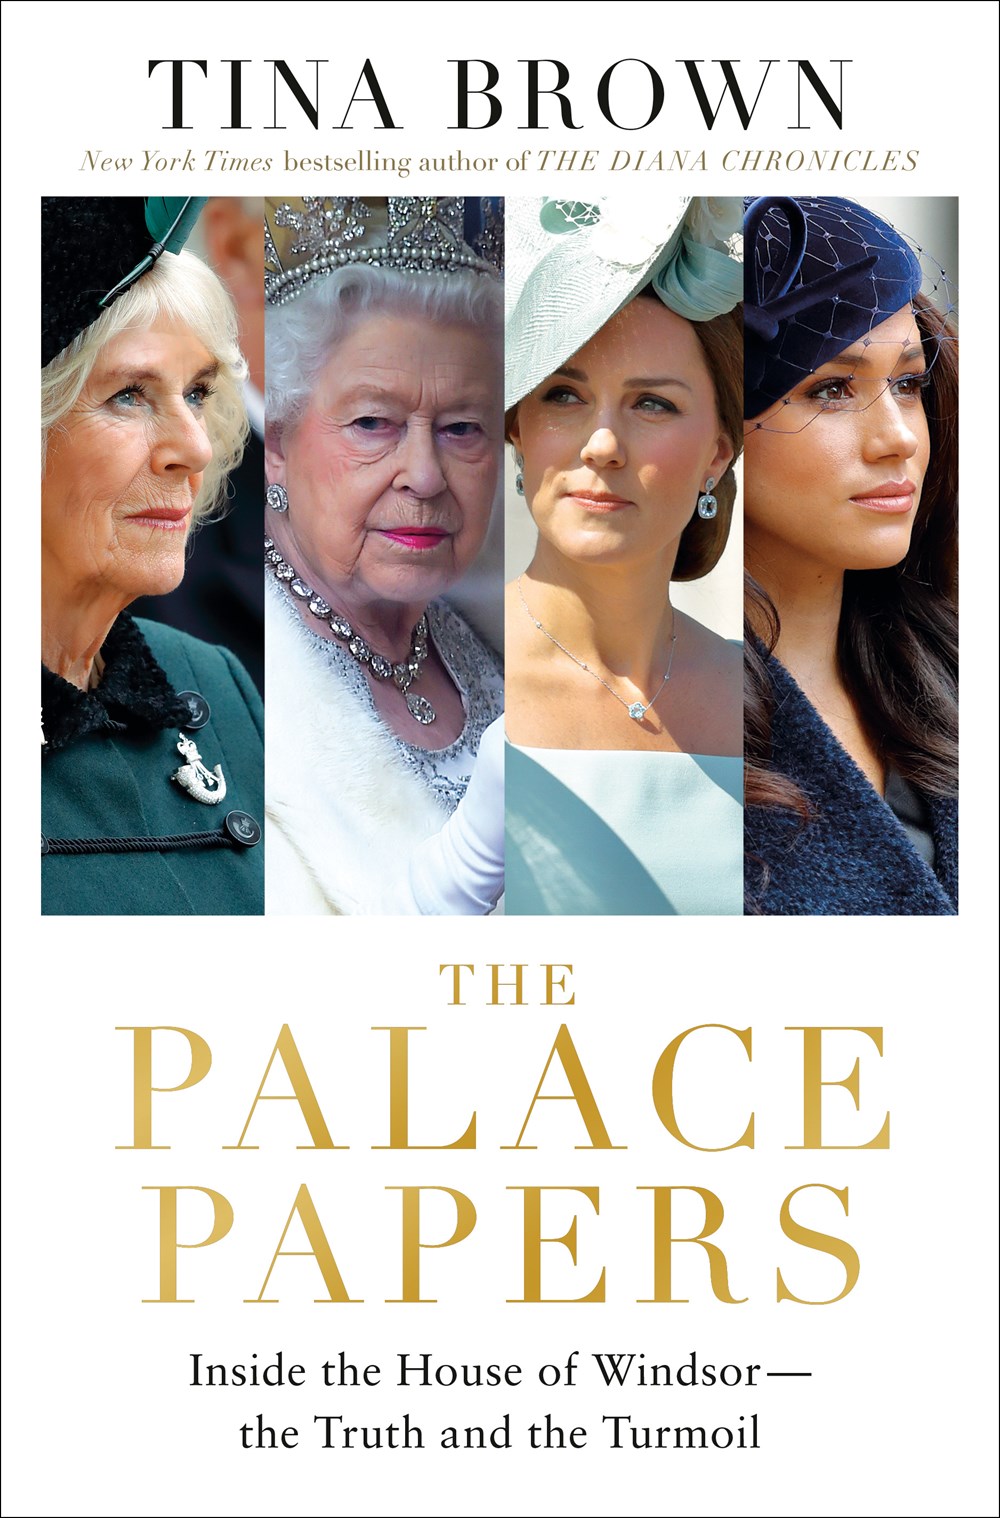 The Palace Papers: Inside the House of Windsor—the Truth and the Turmoil